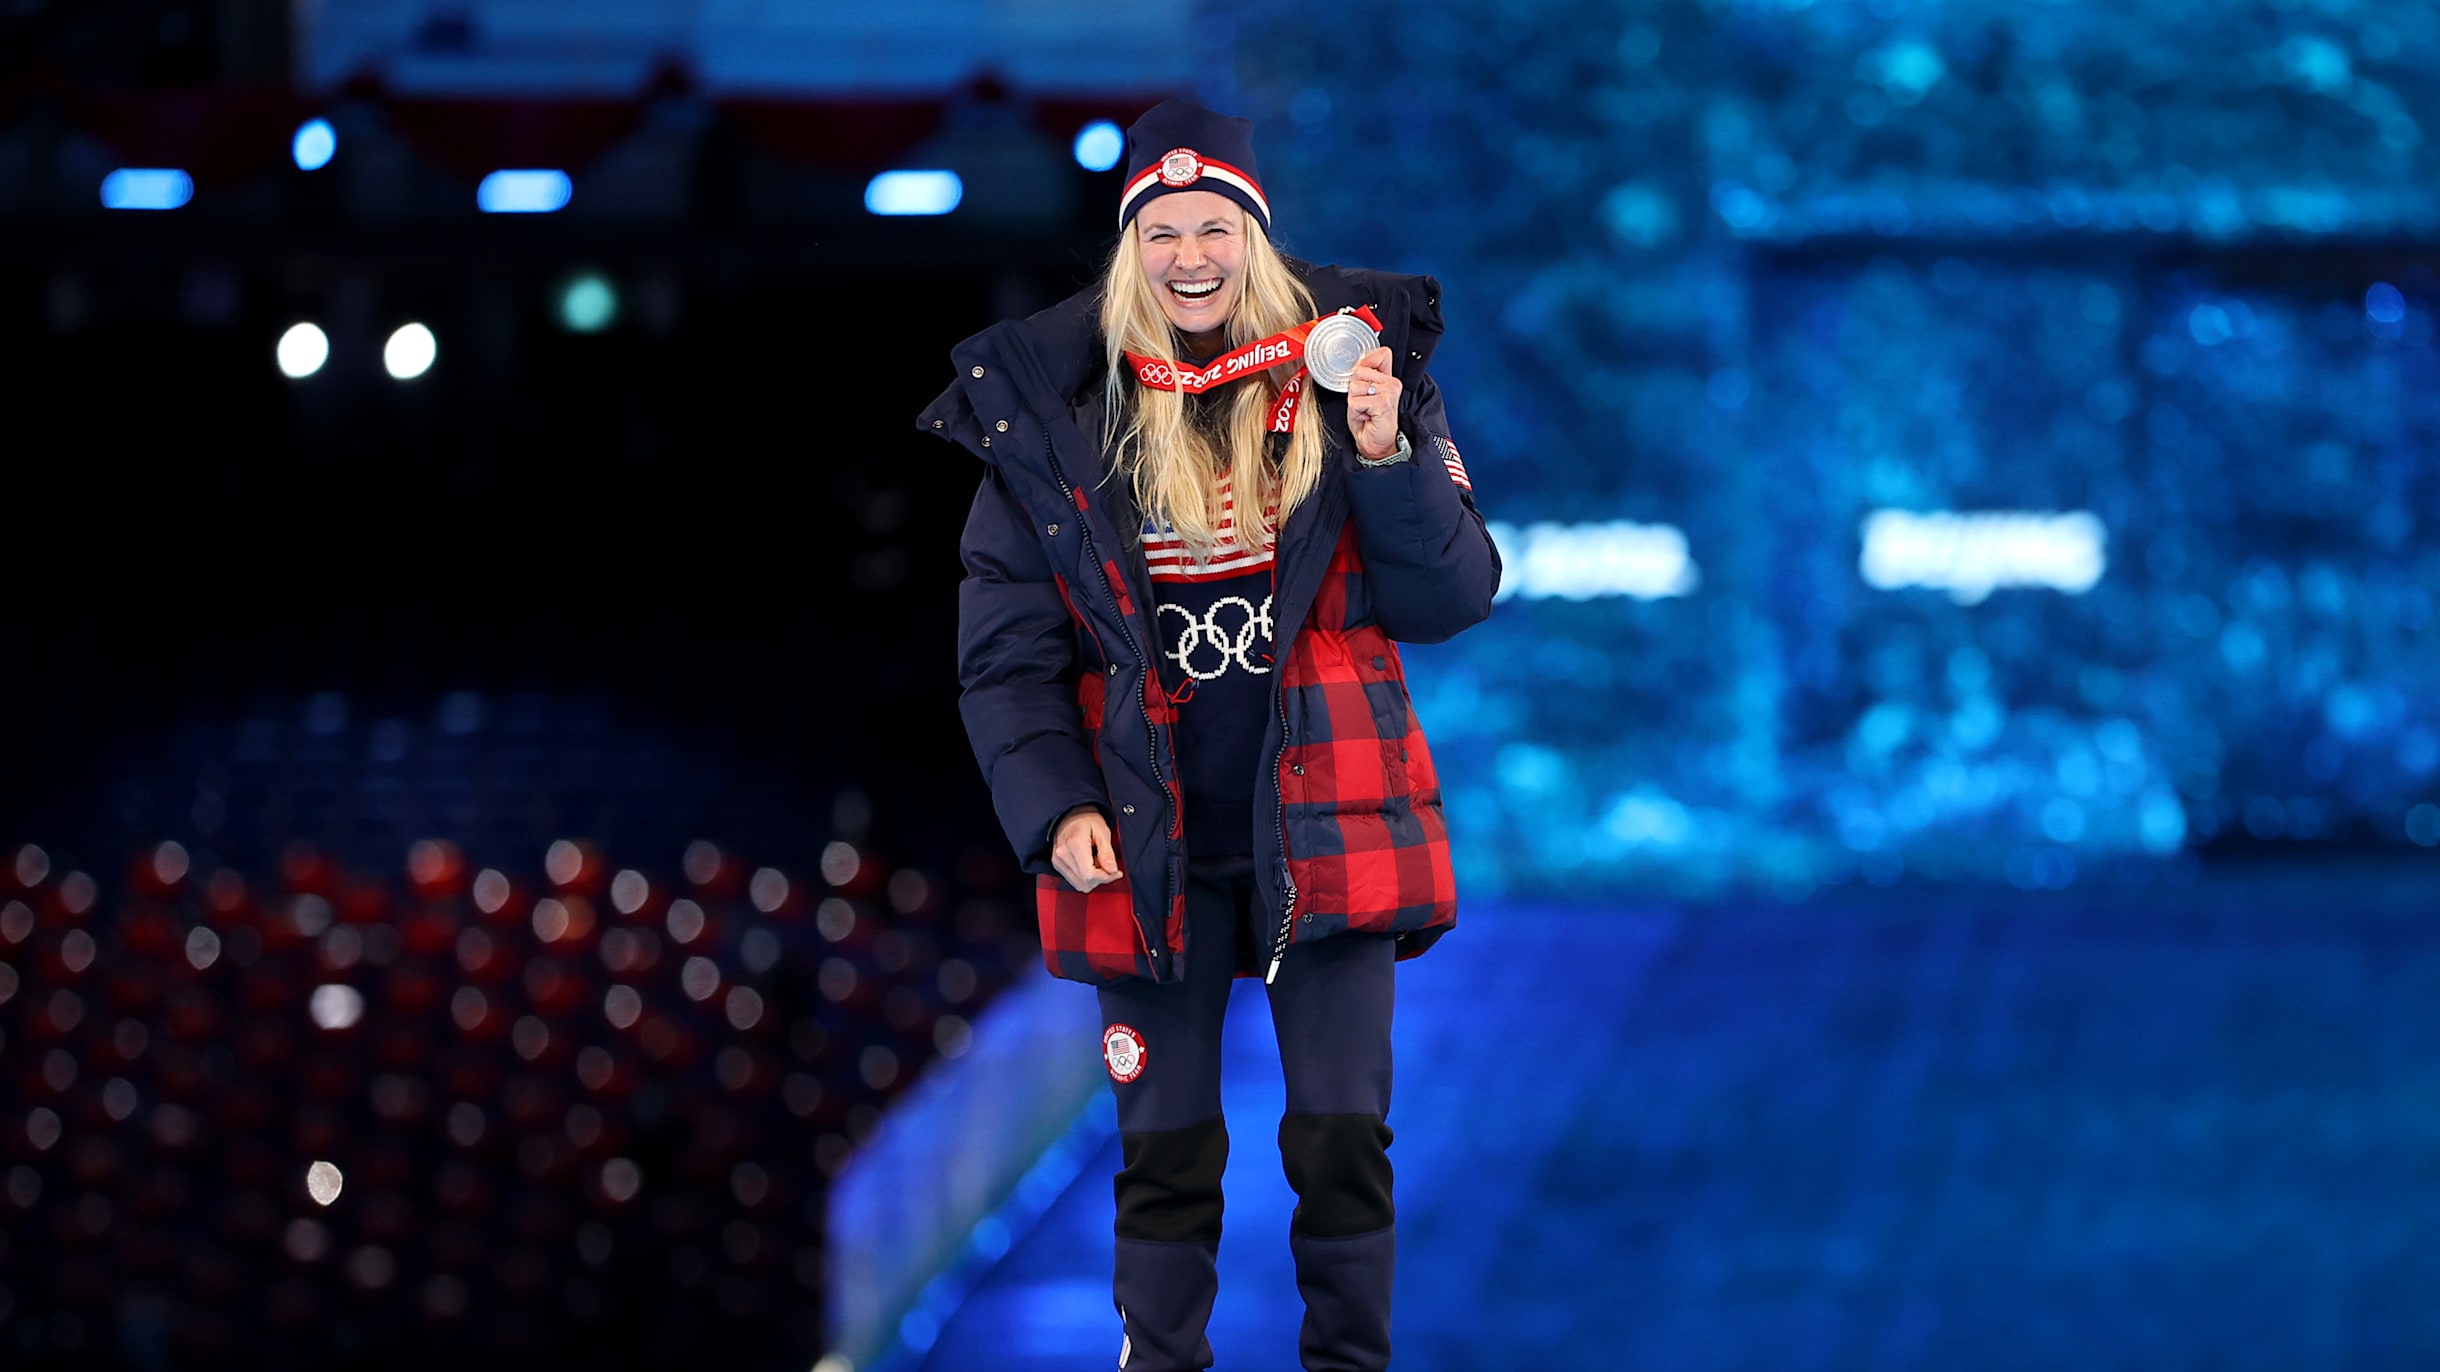 Team USA at Beijing 2022 Winter Olympics: Medals, Results and Top Moments